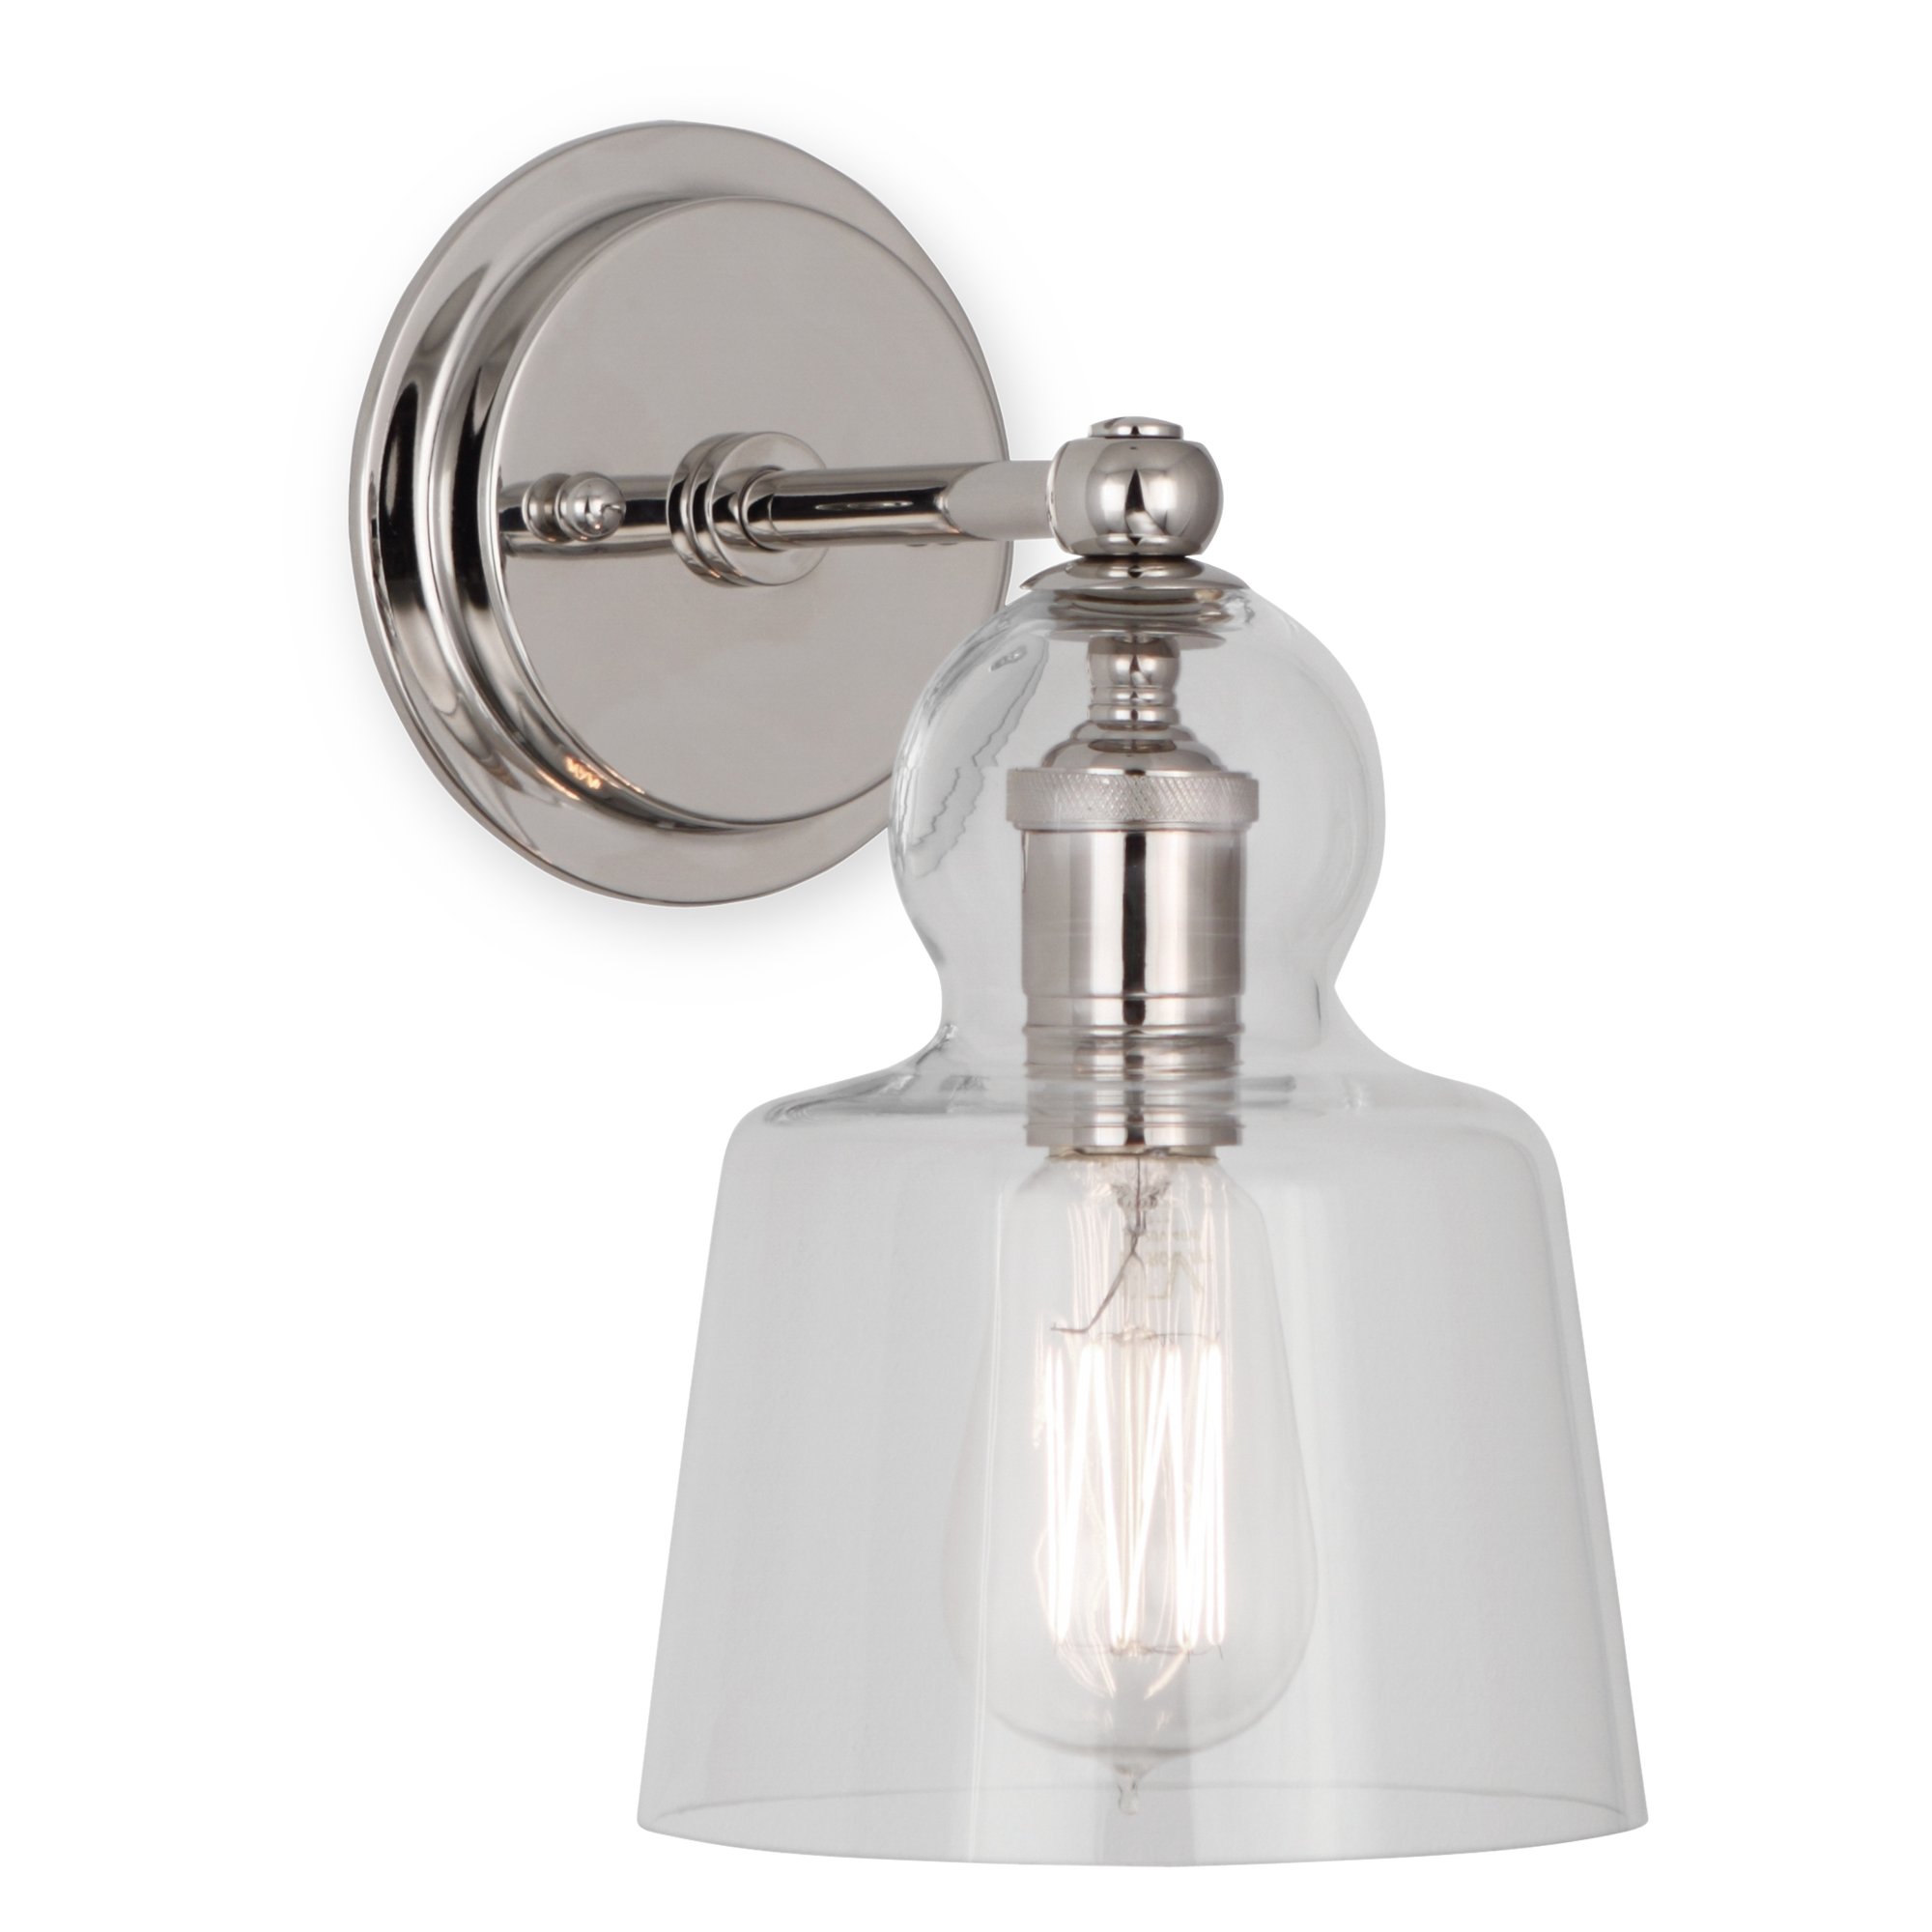 A rustic polished nickel sconce with an elegant clear shade.